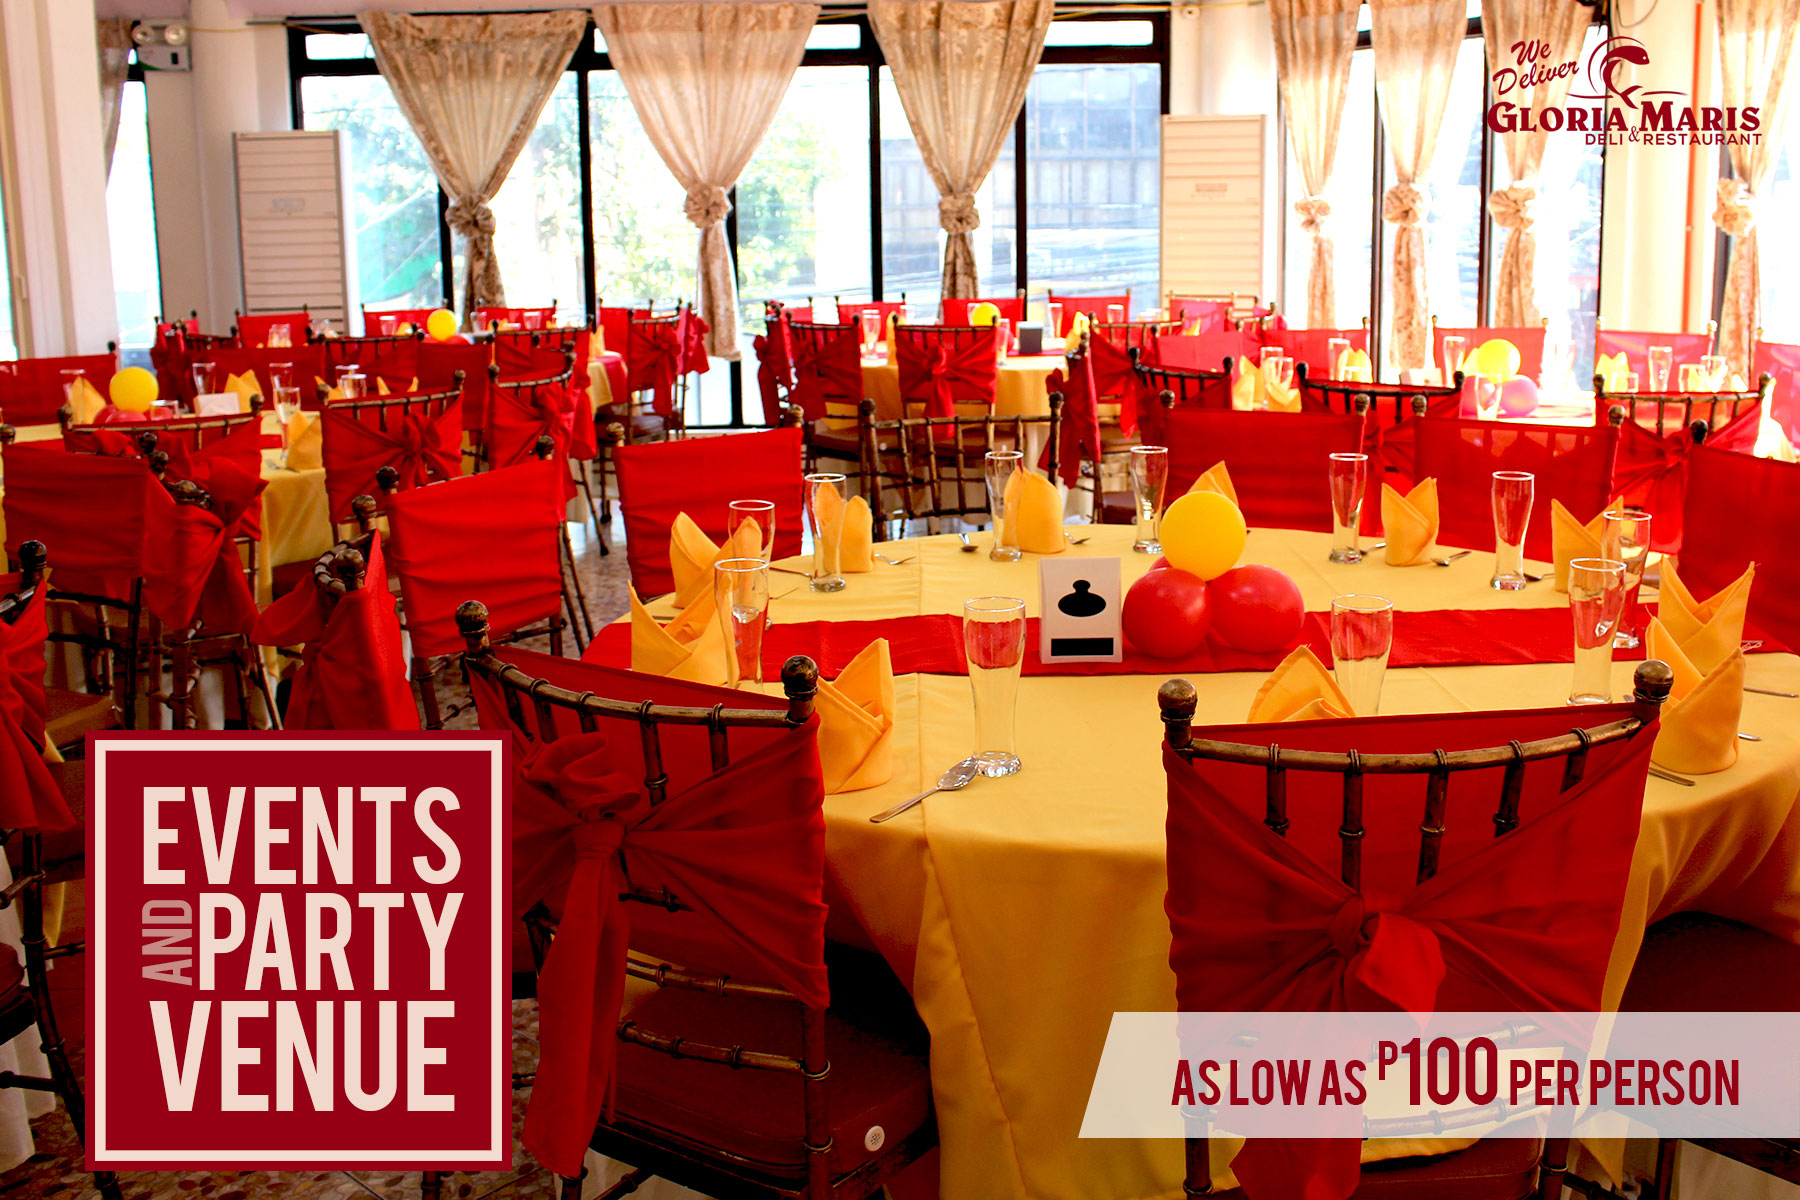 How can you find birthday party rooms for rent?